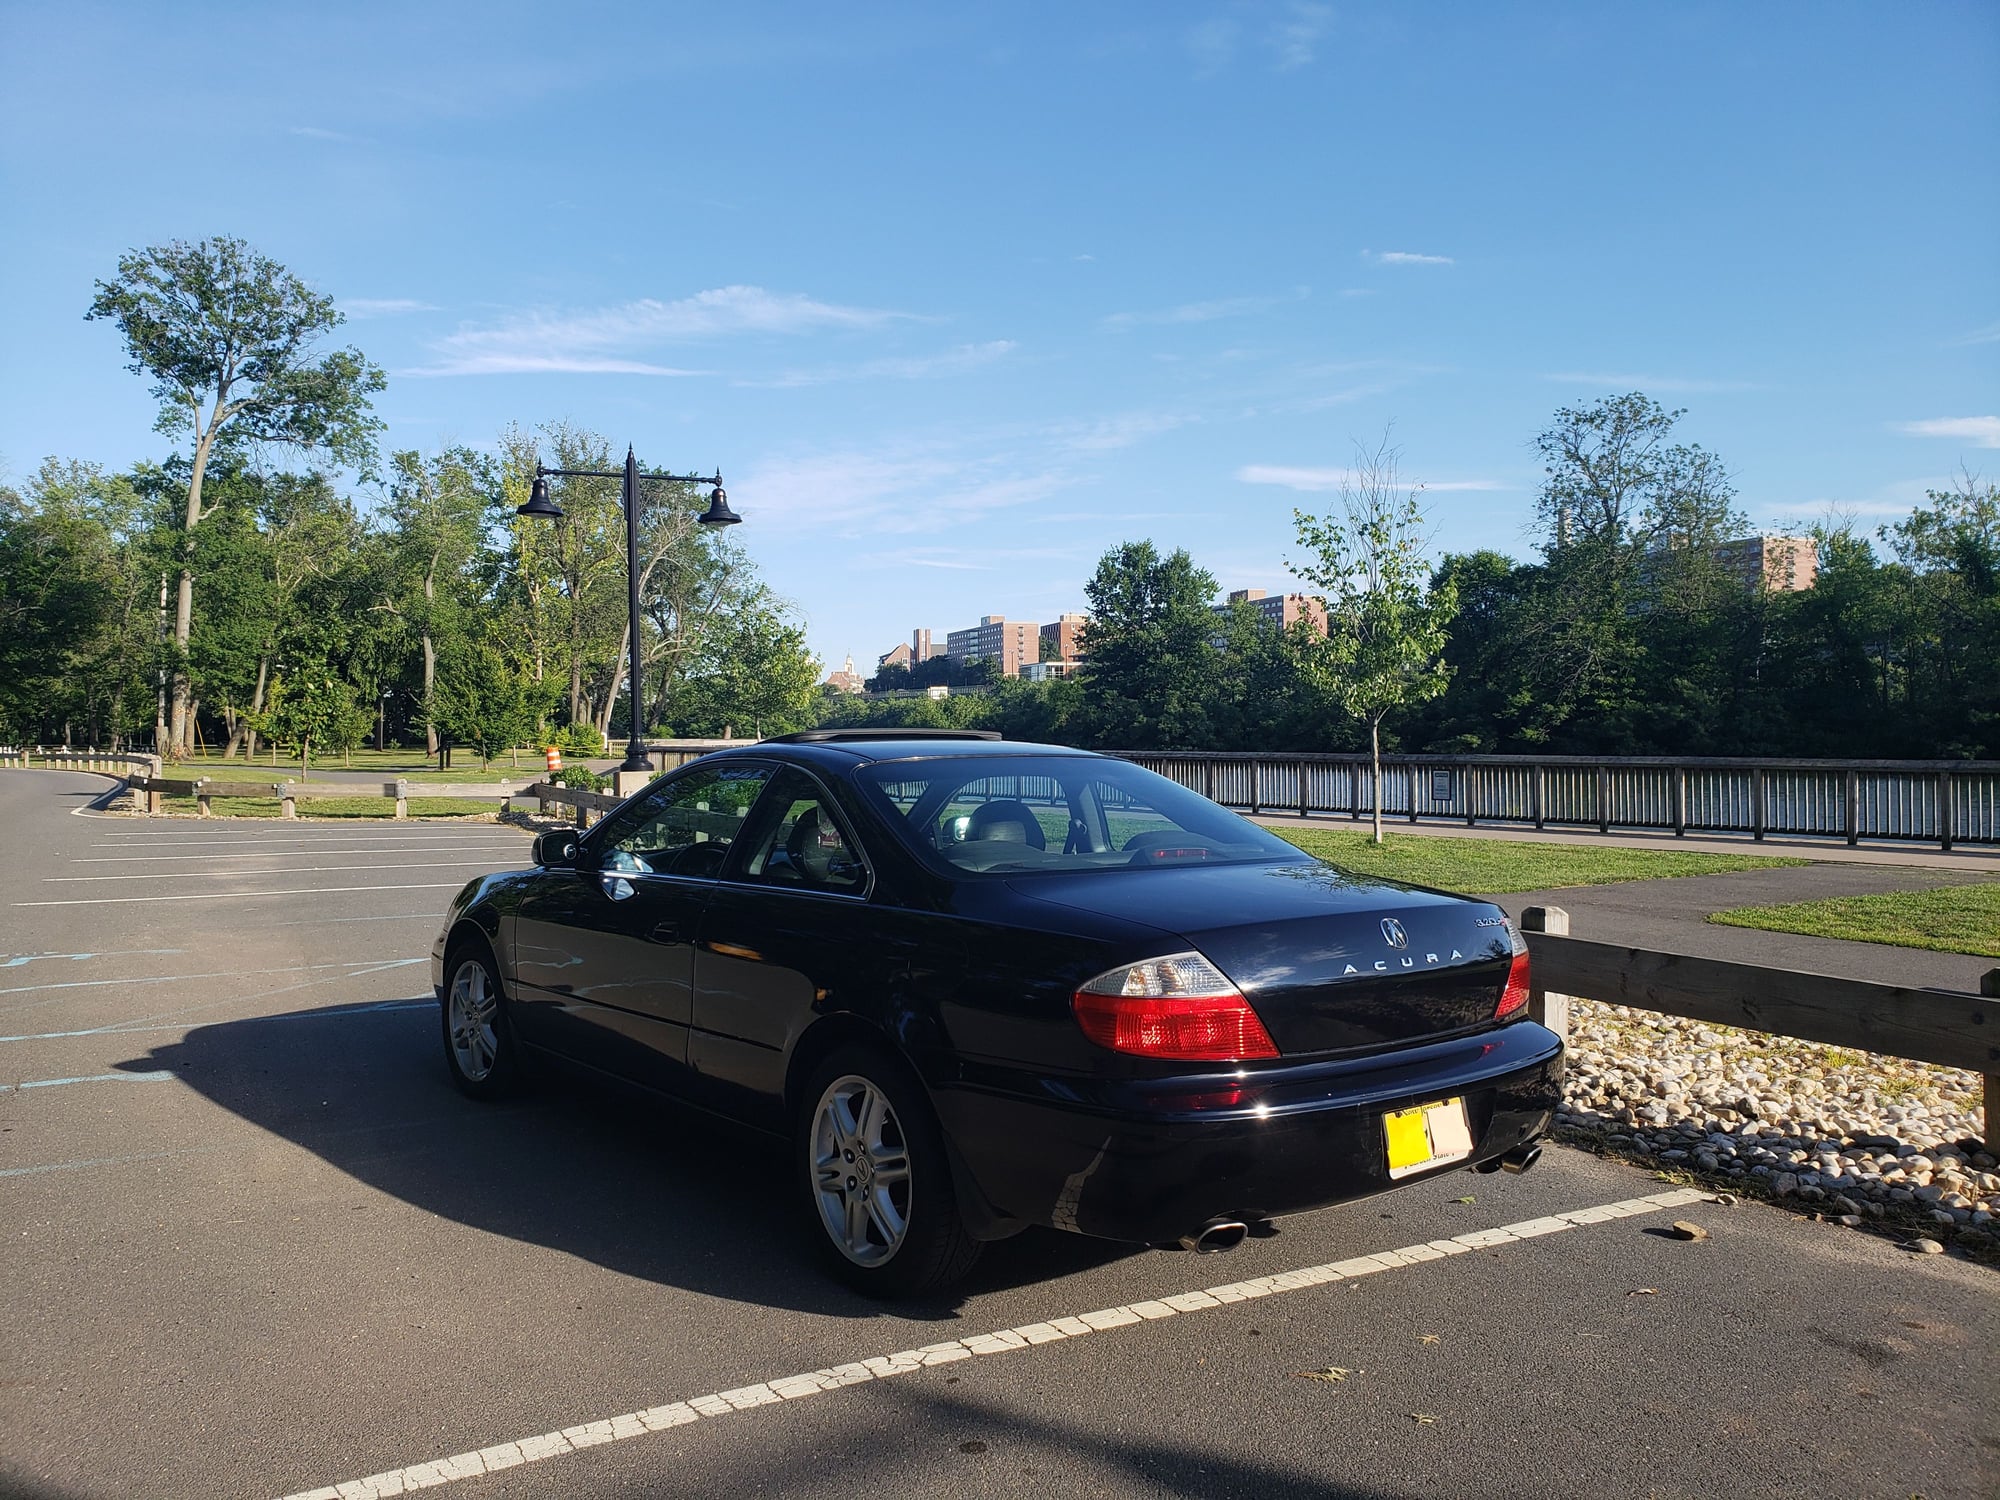 2003 Acura CL - EXPIRED: 2003 Acura CL Type-S AT-5 191k miles - Used - VIN 19uya42663a009178 - 191,800 Miles - 6 cyl - 2WD - Automatic - Coupe - Black - Highland Park, NJ 08904, United States